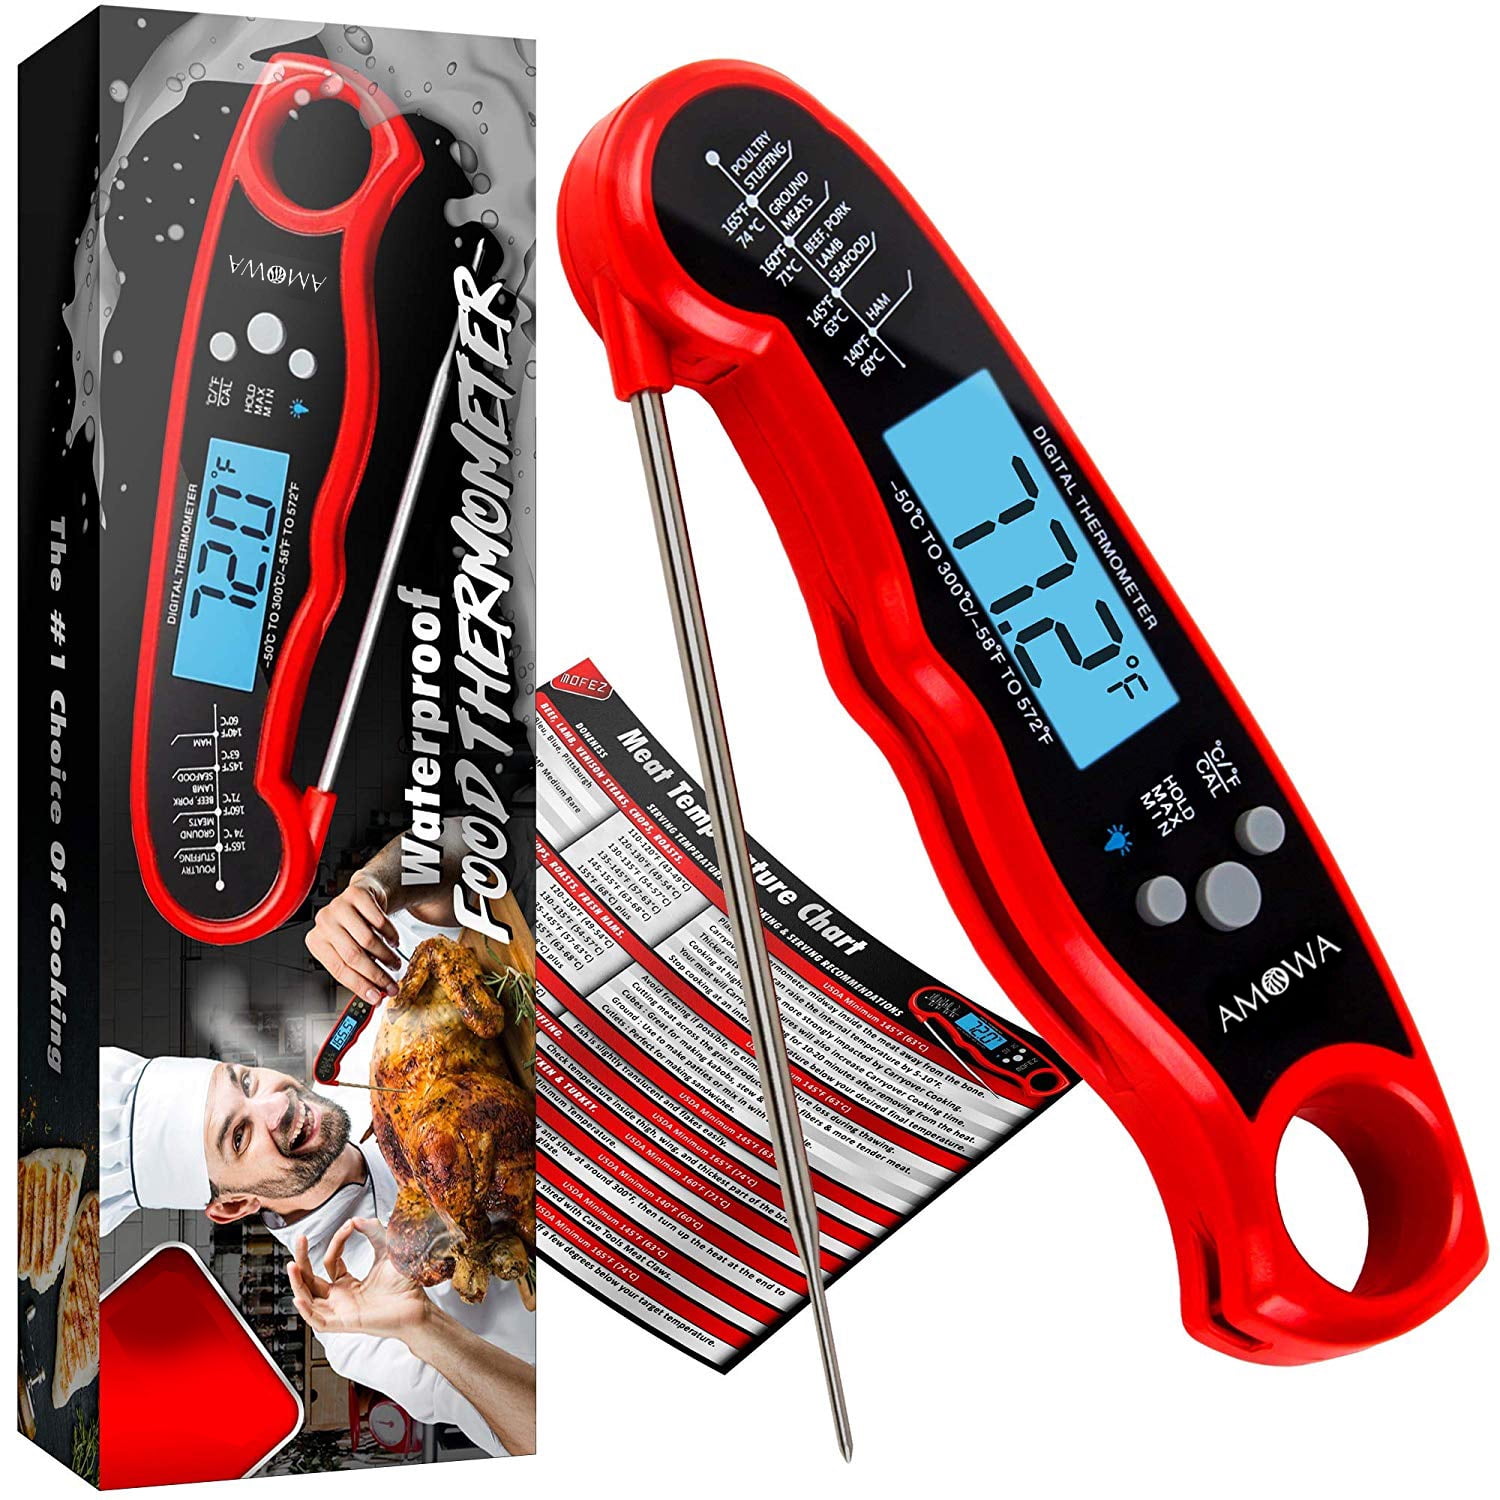 Waterproof Digital Meat Drink Thermometer Fast instant Read BBQ Cooking Temp 